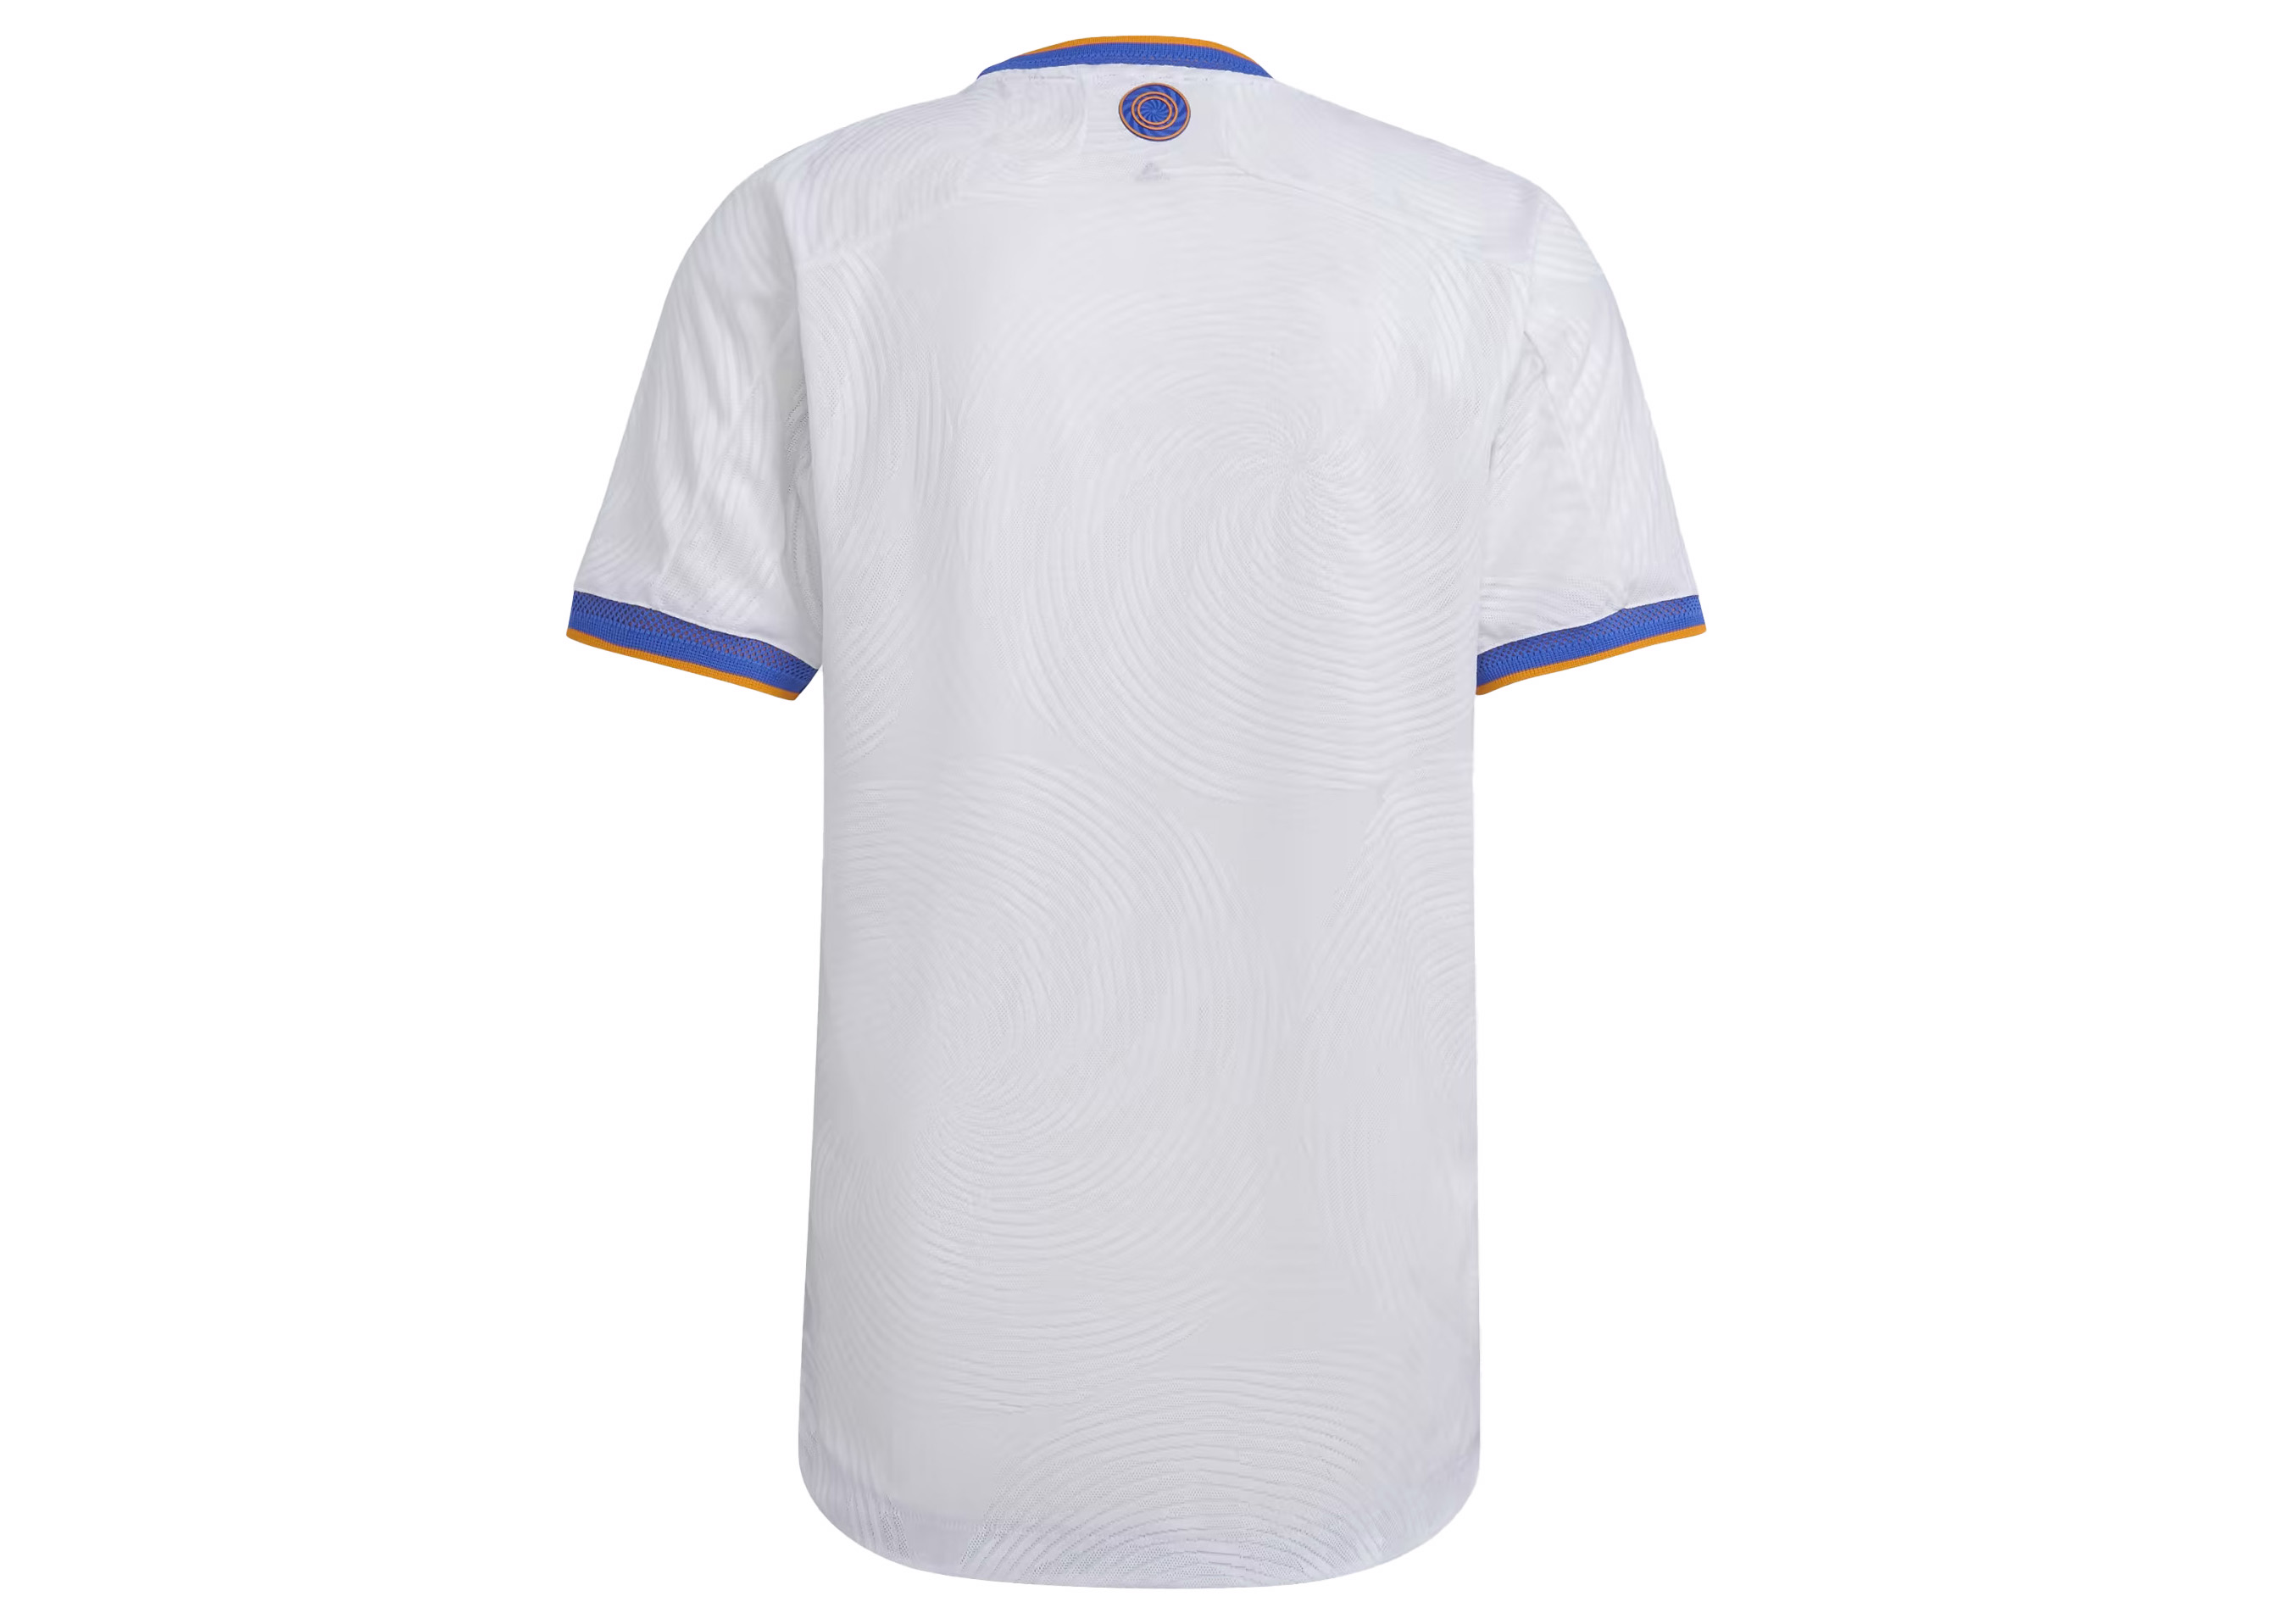 real madrid shirt is white